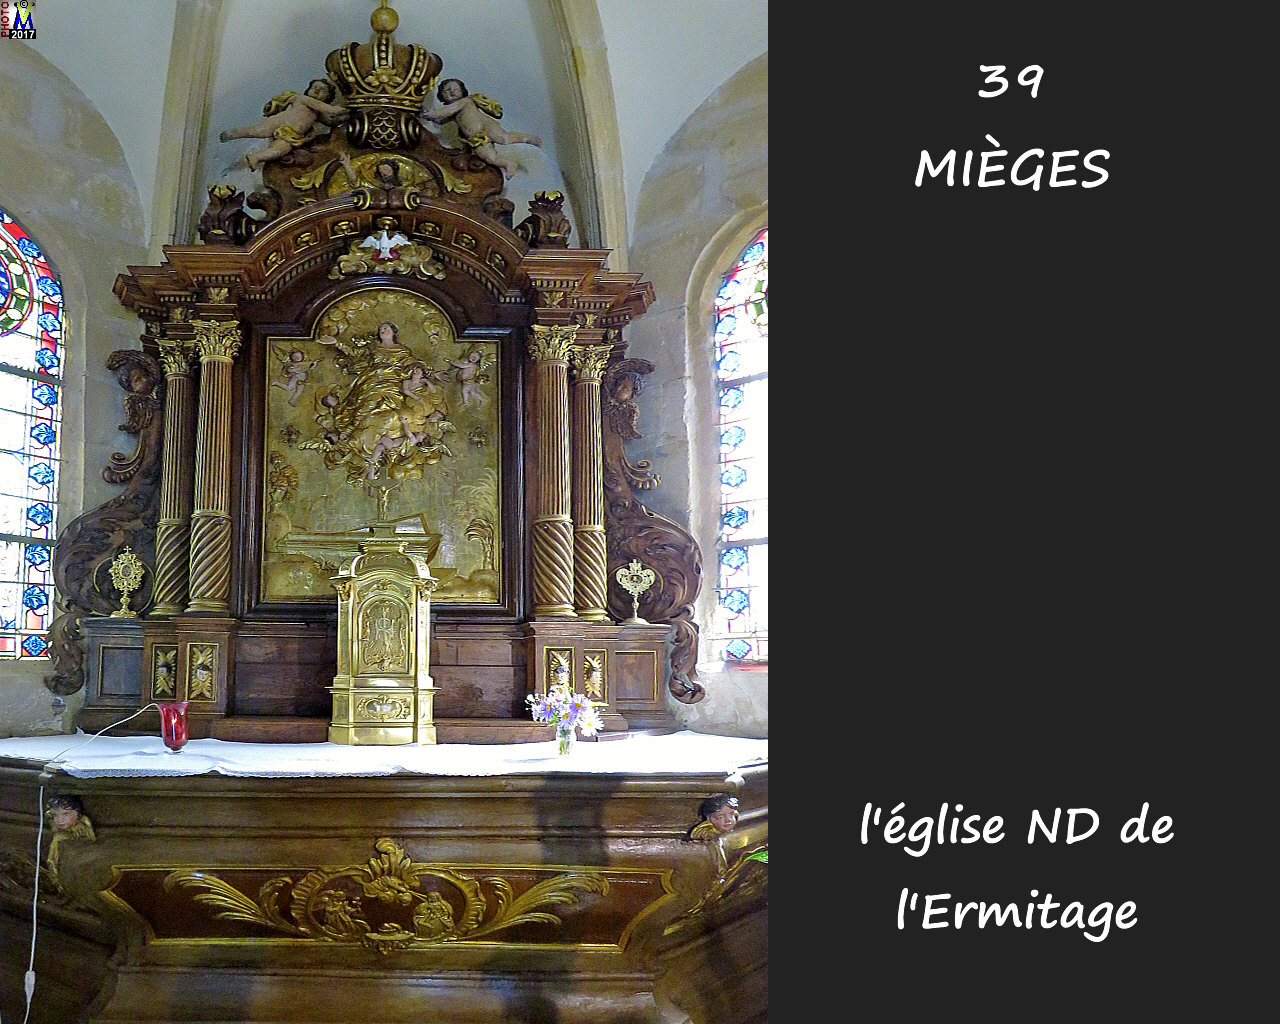 39MIEGES_Ermitage_124.jpg